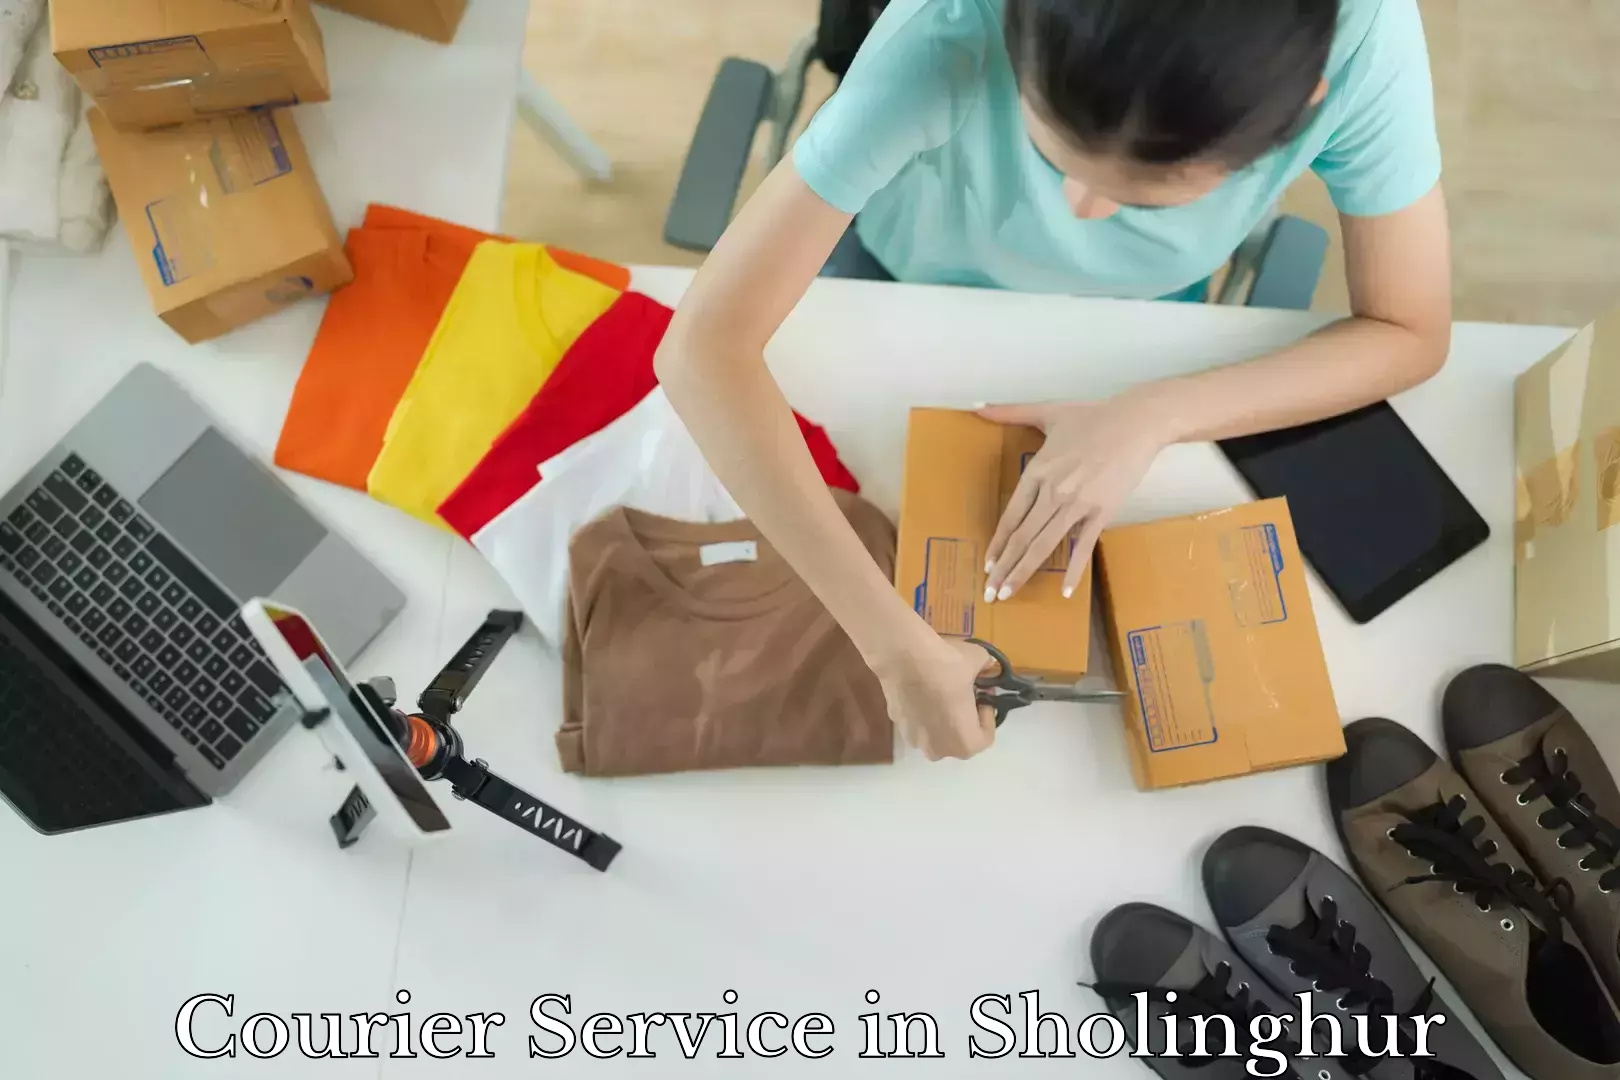 Express package services in Sholinghur